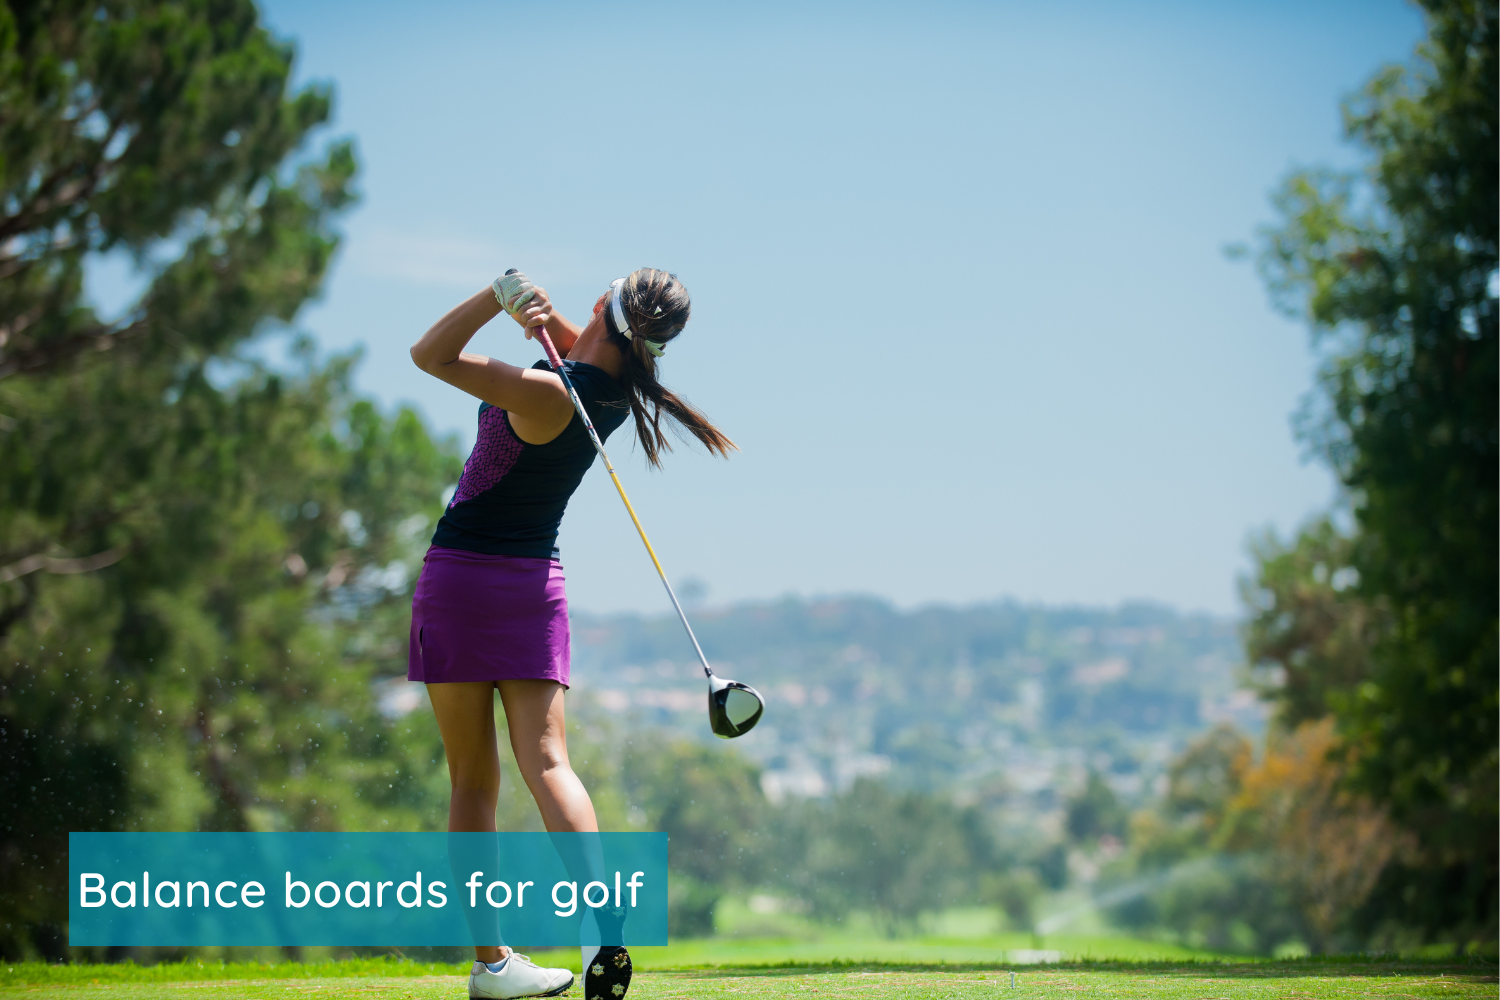 How Balance Boards can benefit Golfers